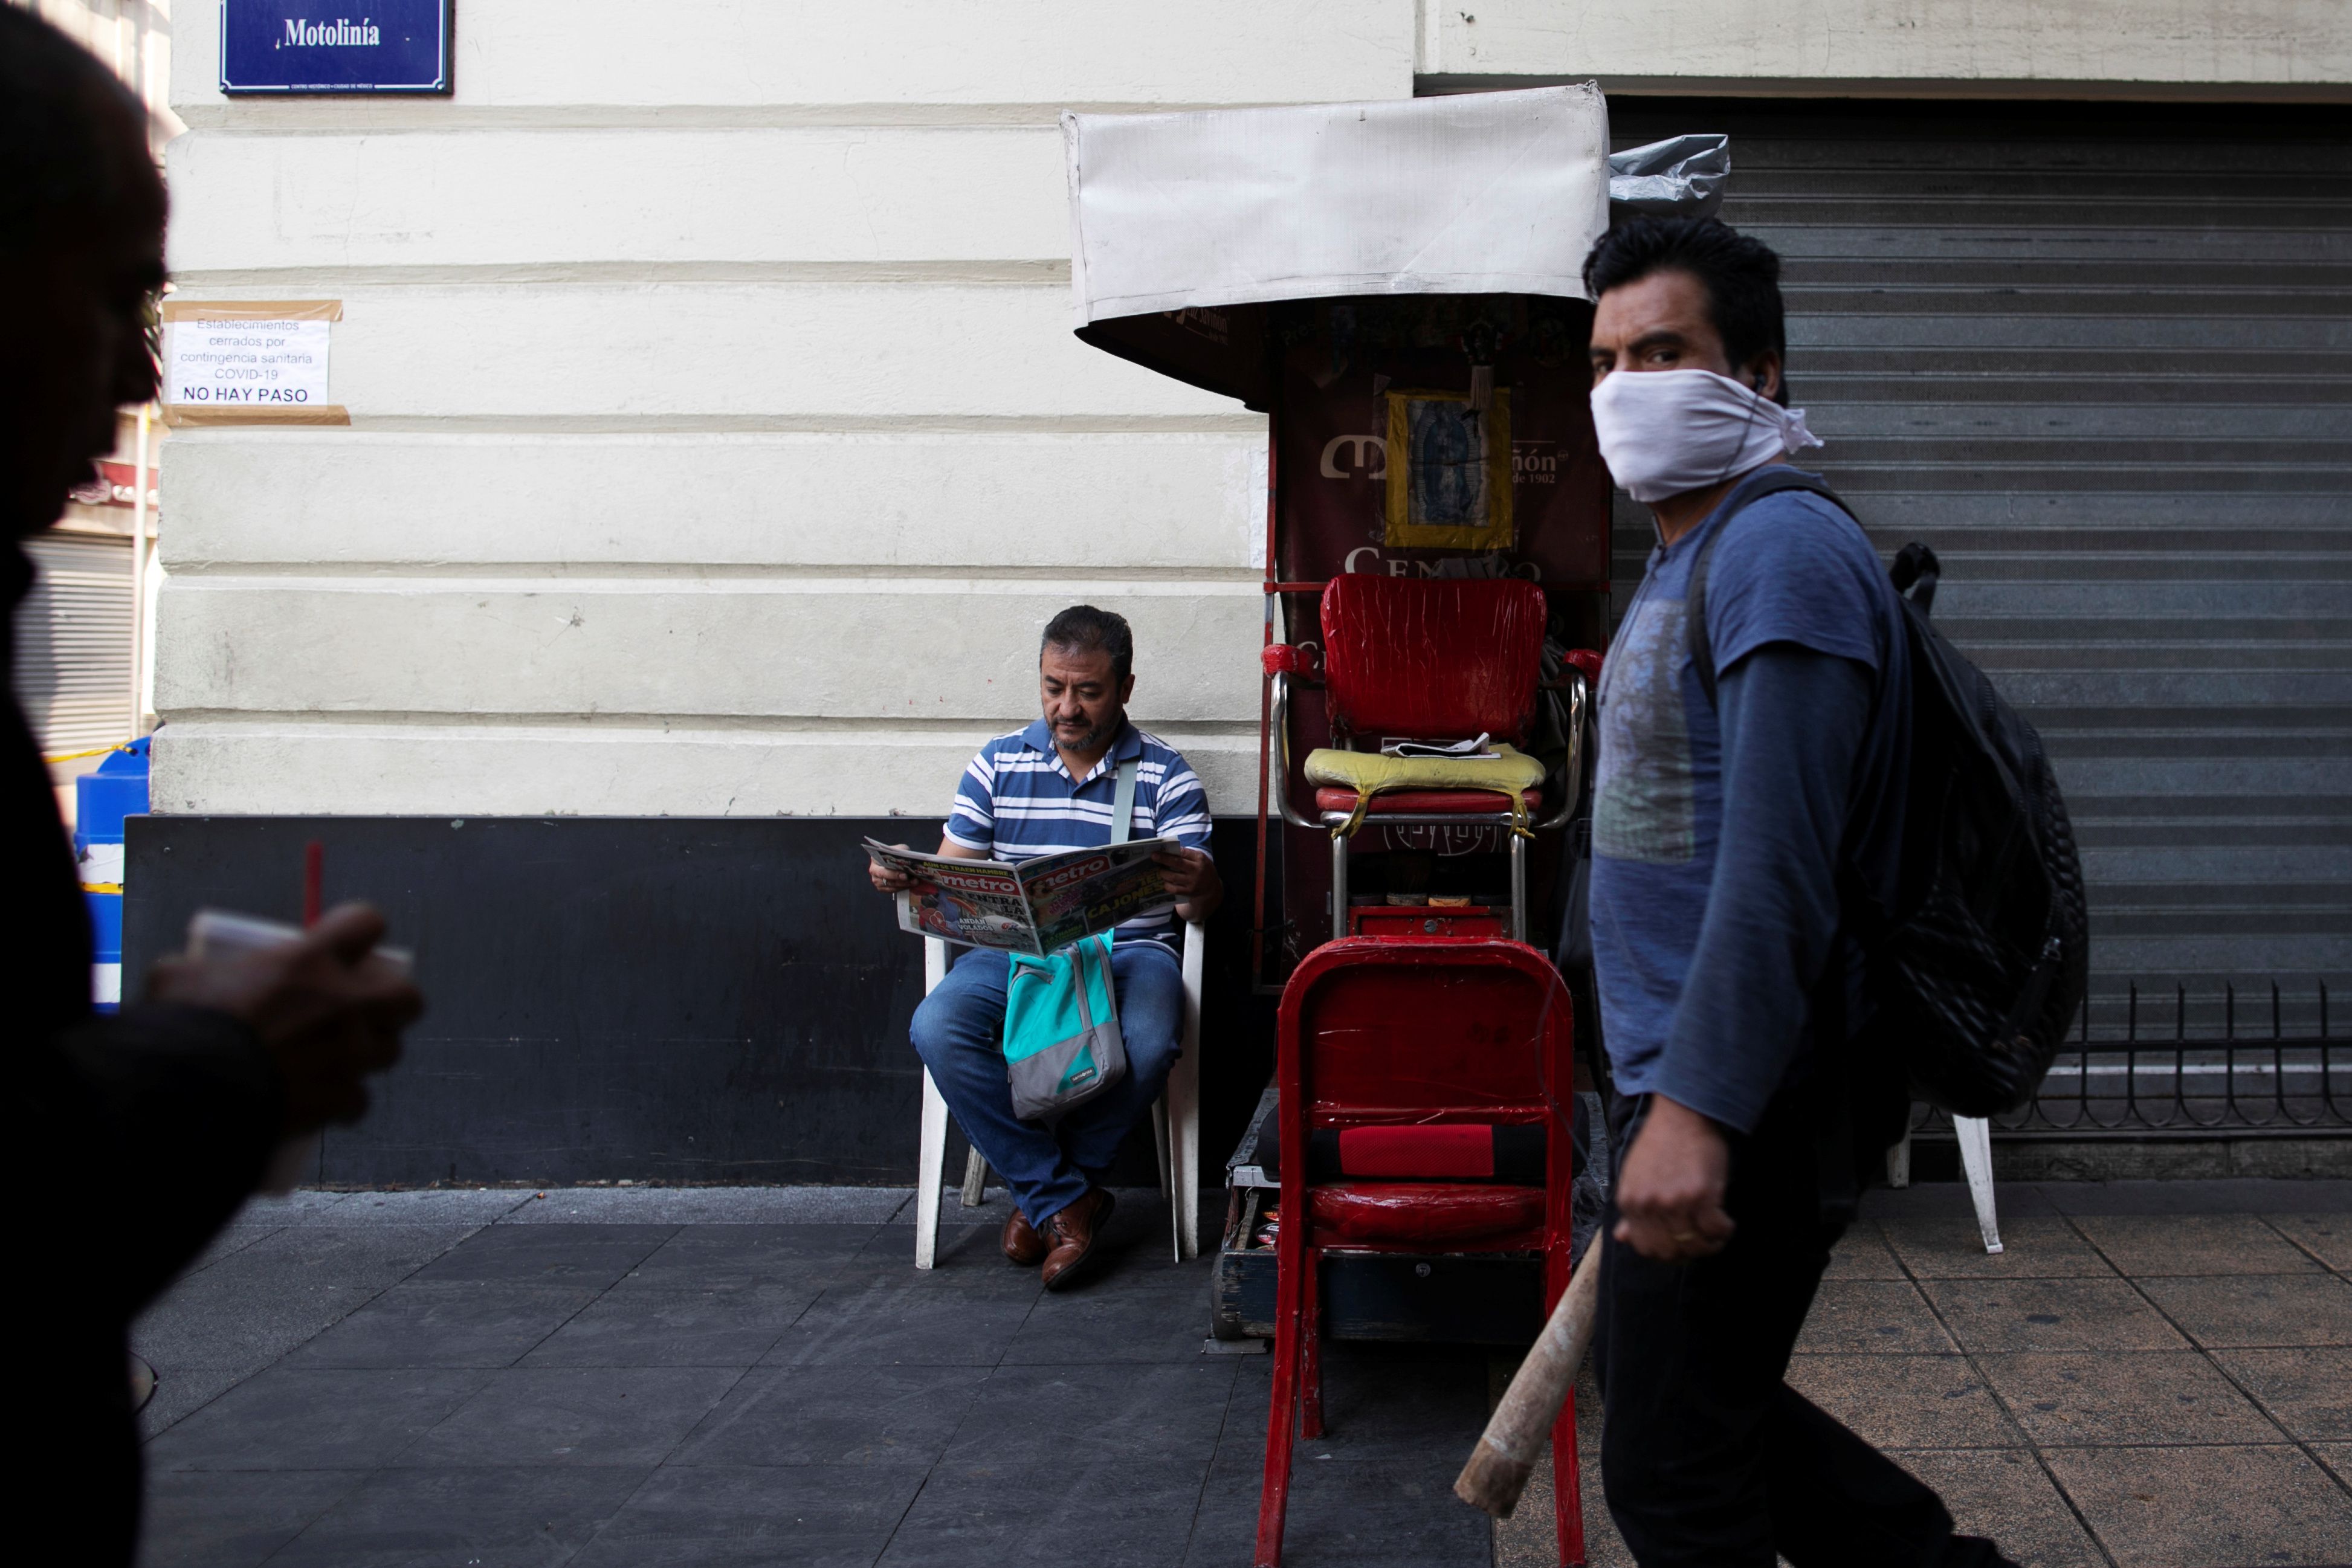 A shoe shiner reads the paper as he waits for costumers in one of the main streets in downtown as Mexico's government declared a health emergency and issued stricter rules to curb the spread of the coronavirus disease (COVID-19), in Mexico City, Mexico April 3, 2020. REUTERS/Carlos Jasso